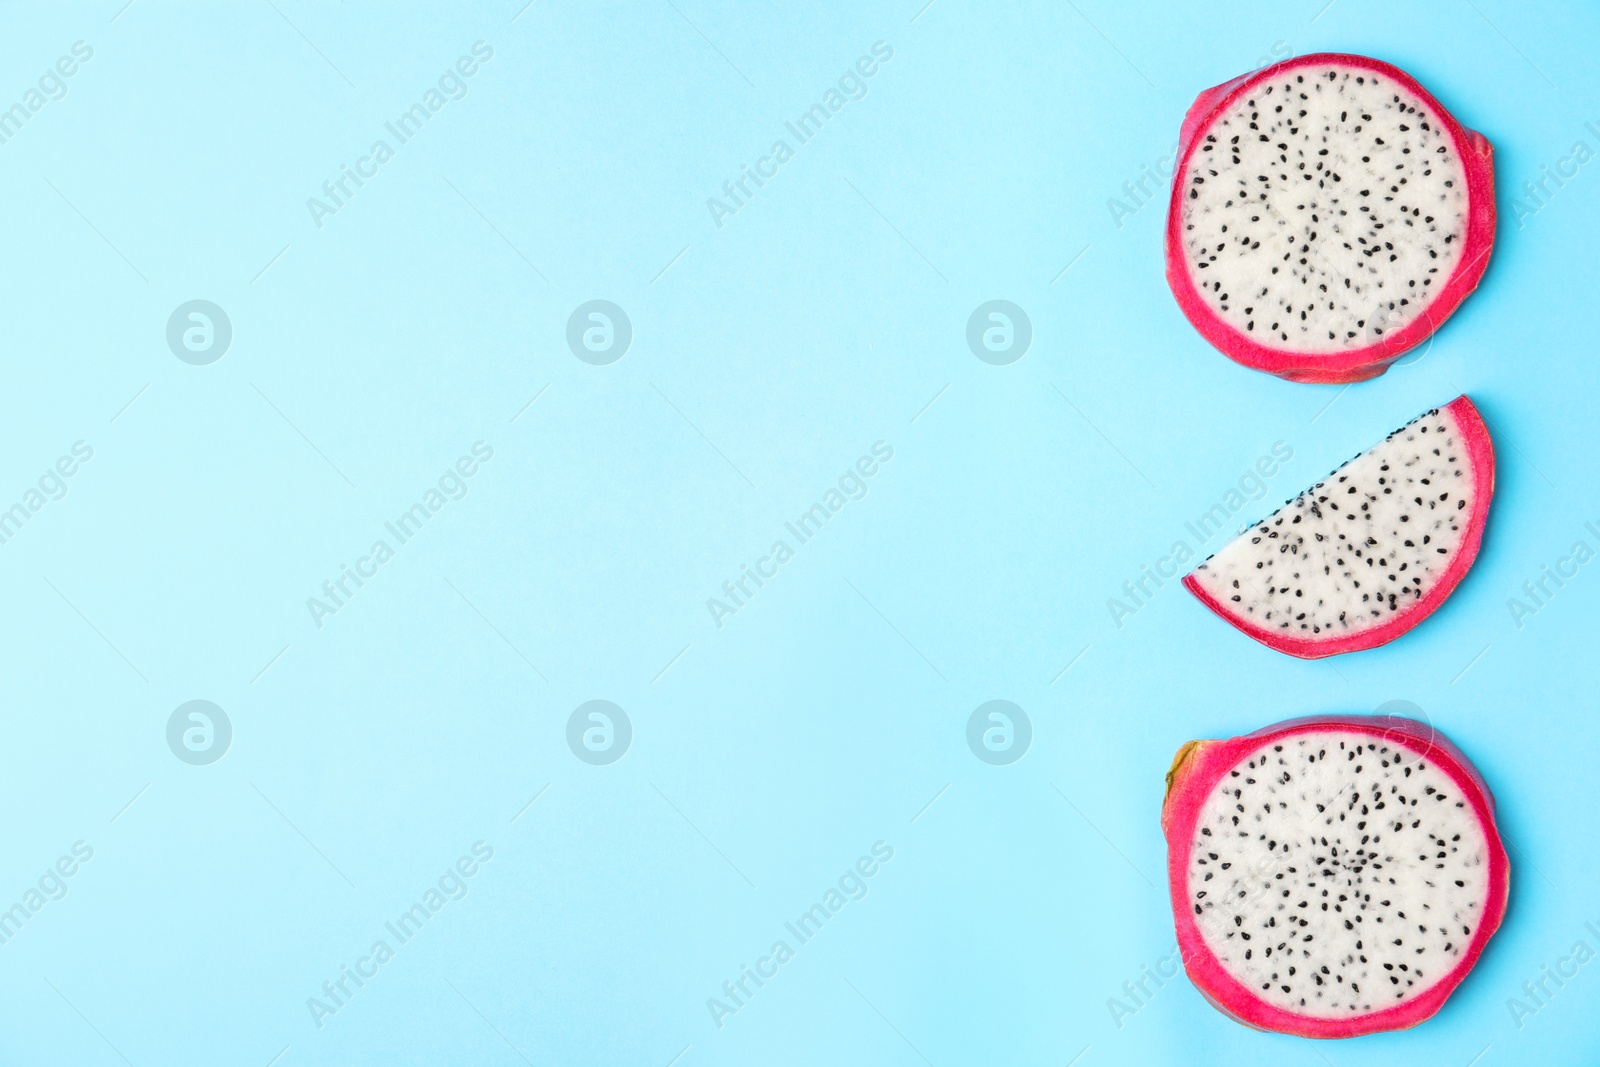 Photo of Slices of delicious ripe dragon fruit (pitahaya) on light blue background, flat lay. Space for text